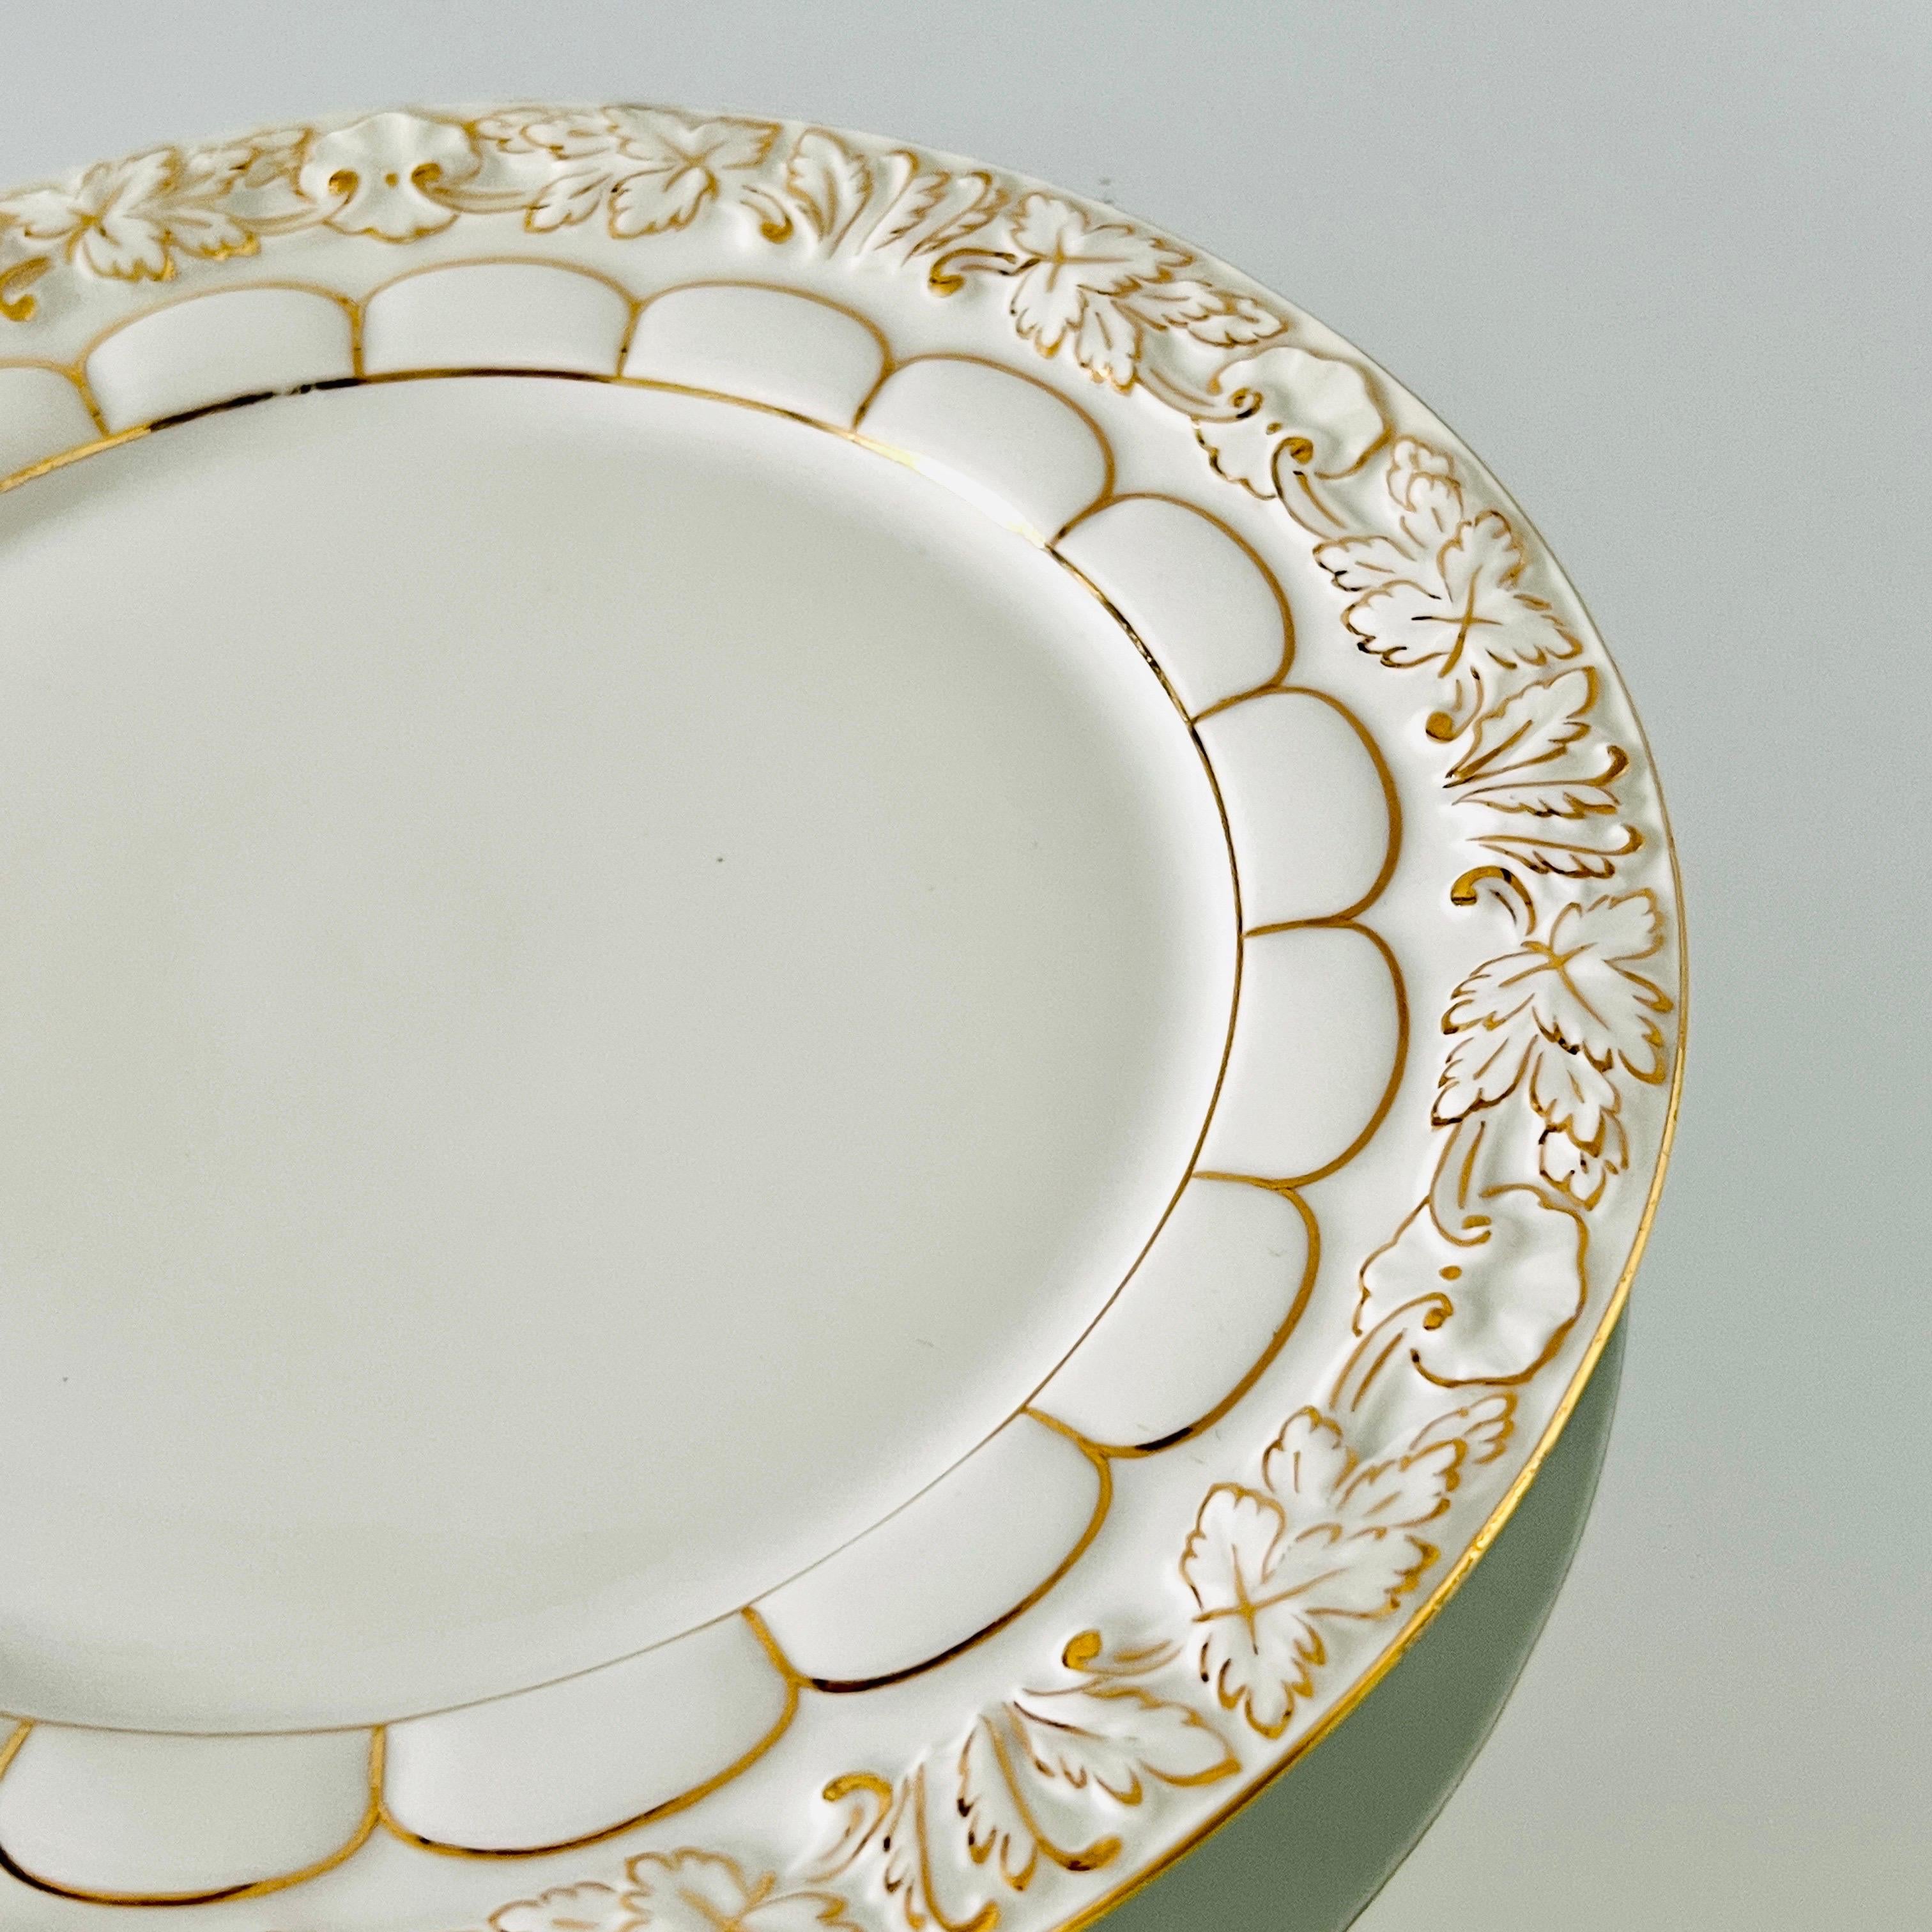 Mid-20th Century Meissen Germany Porcelain and Gold Baroque Dessert Plates, Set / 11 For Sale